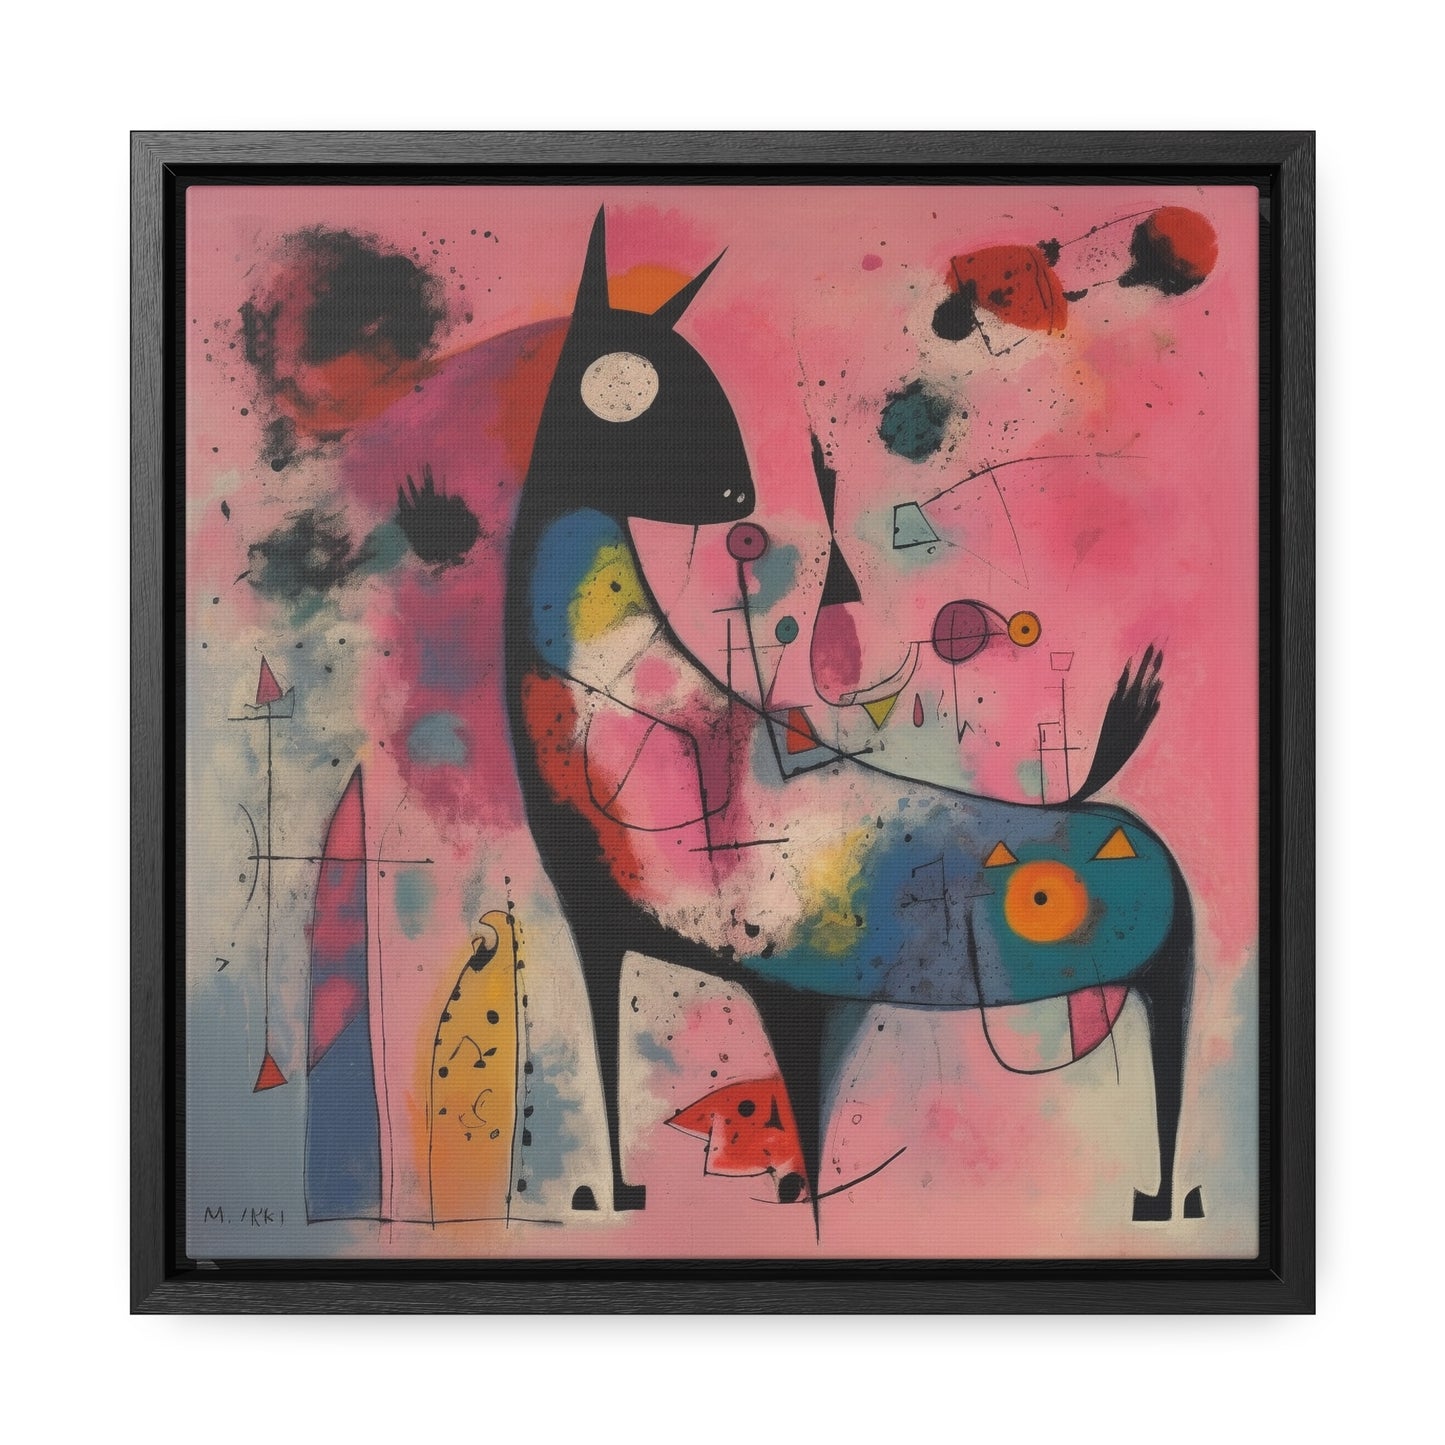 The Dreams of the Child 64, Gallery Canvas Wraps, Square Frame